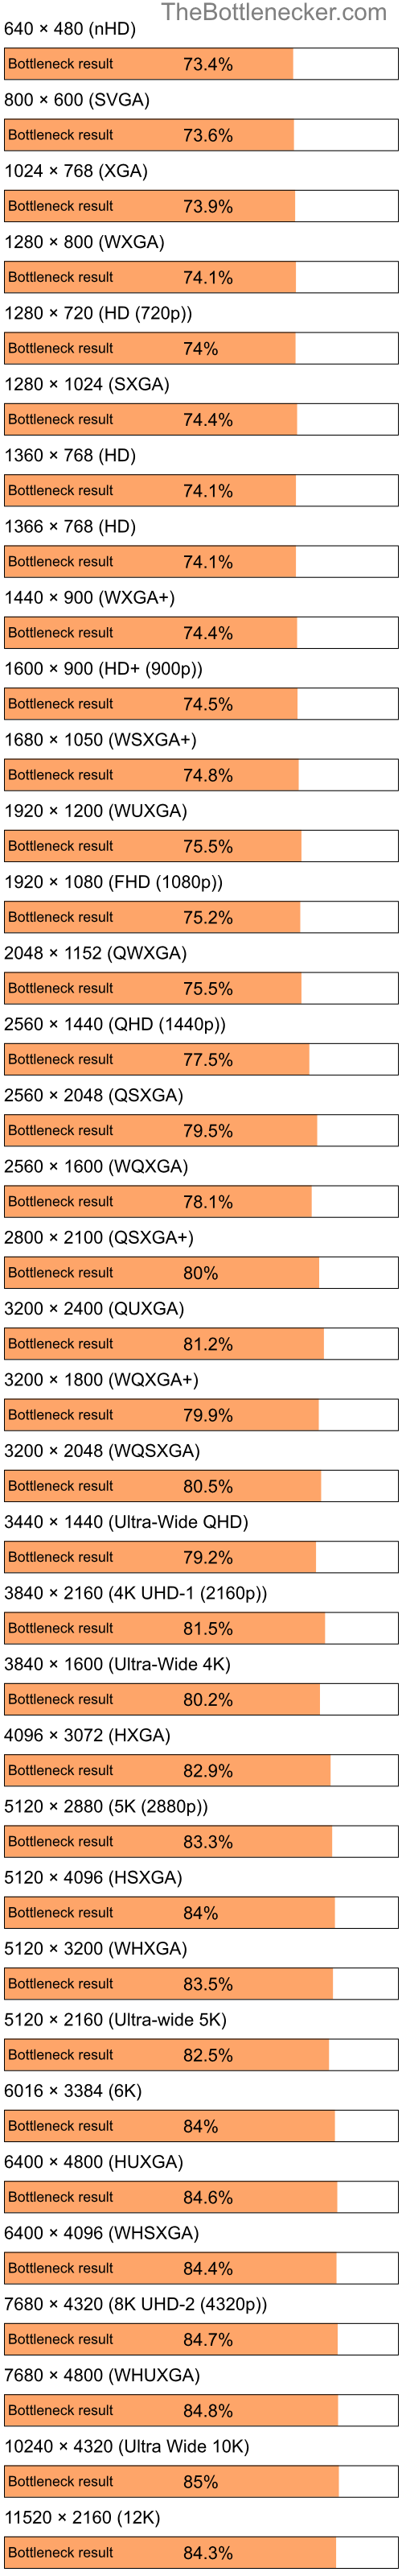 Bottleneck results by resolution for Intel Pentium 4 and AMD Mobility Radeon 4100 in Graphic Card Intense Tasks